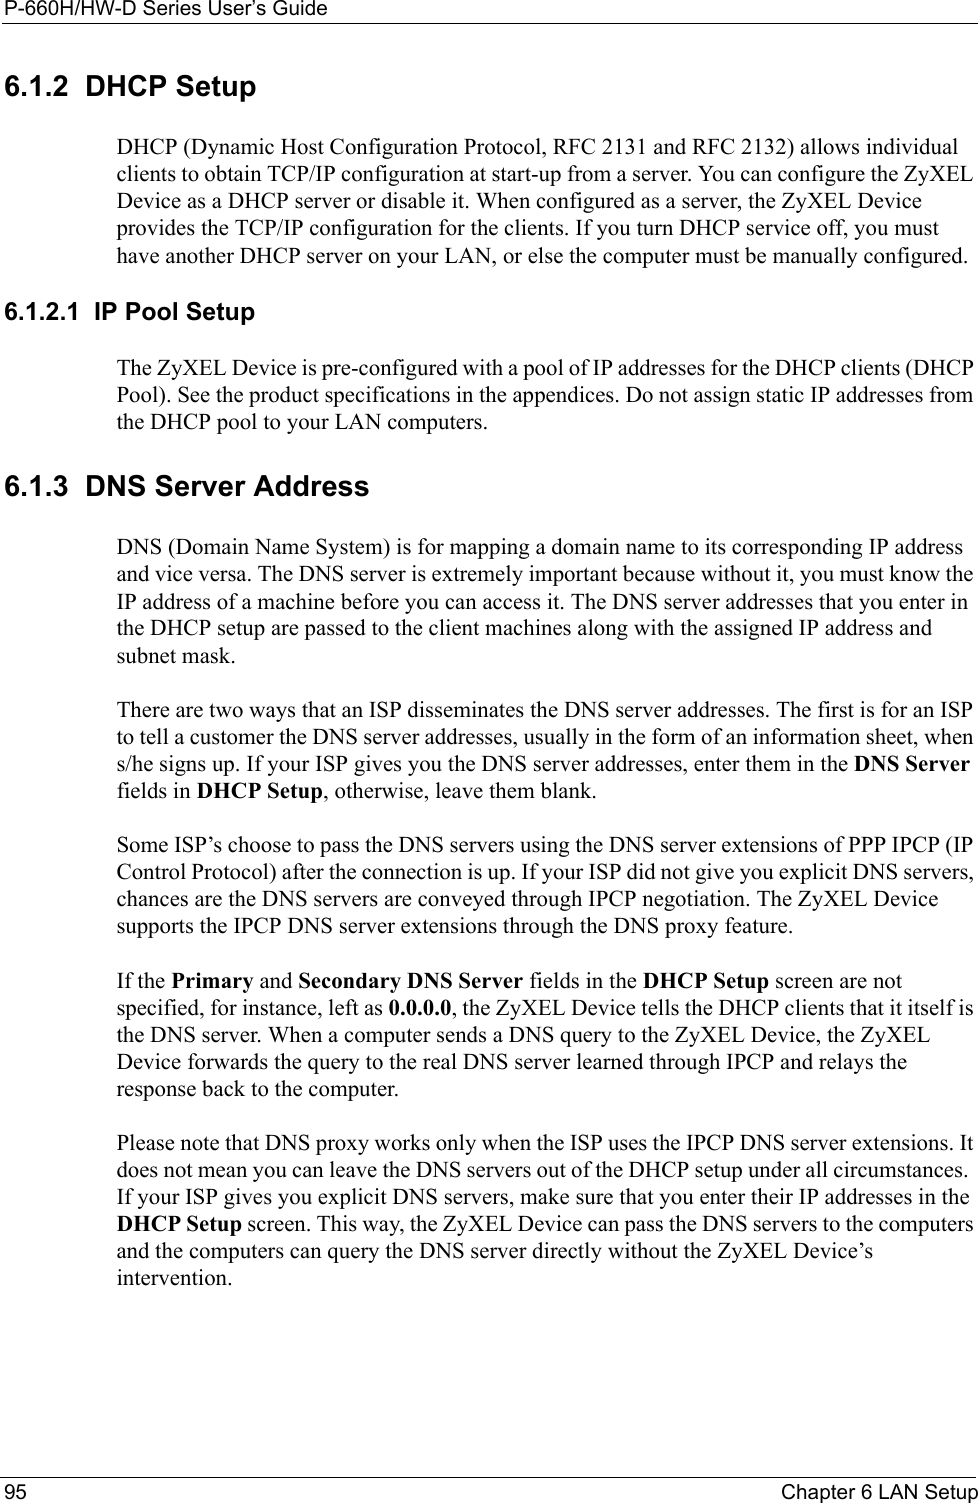 P-660H/HW-D Series User’s Guide95 Chapter 6 LAN Setup6.1.2  DHCP SetupDHCP (Dynamic Host Configuration Protocol, RFC 2131 and RFC 2132) allows individual clients to obtain TCP/IP configuration at start-up from a server. You can configure the ZyXEL Device as a DHCP server or disable it. When configured as a server, the ZyXEL Device provides the TCP/IP configuration for the clients. If you turn DHCP service off, you must have another DHCP server on your LAN, or else the computer must be manually configured. 6.1.2.1  IP Pool SetupThe ZyXEL Device is pre-configured with a pool of IP addresses for the DHCP clients (DHCP Pool). See the product specifications in the appendices. Do not assign static IP addresses from the DHCP pool to your LAN computers.6.1.3  DNS Server AddressDNS (Domain Name System) is for mapping a domain name to its corresponding IP address and vice versa. The DNS server is extremely important because without it, you must know the IP address of a machine before you can access it. The DNS server addresses that you enter in the DHCP setup are passed to the client machines along with the assigned IP address and subnet mask.There are two ways that an ISP disseminates the DNS server addresses. The first is for an ISP to tell a customer the DNS server addresses, usually in the form of an information sheet, when s/he signs up. If your ISP gives you the DNS server addresses, enter them in the DNS Server fields in DHCP Setup, otherwise, leave them blank.Some ISP’s choose to pass the DNS servers using the DNS server extensions of PPP IPCP (IP Control Protocol) after the connection is up. If your ISP did not give you explicit DNS servers, chances are the DNS servers are conveyed through IPCP negotiation. The ZyXEL Device supports the IPCP DNS server extensions through the DNS proxy feature.If the Primary and Secondary DNS Server fields in the DHCP Setup screen are not specified, for instance, left as 0.0.0.0, the ZyXEL Device tells the DHCP clients that it itself is the DNS server. When a computer sends a DNS query to the ZyXEL Device, the ZyXEL Device forwards the query to the real DNS server learned through IPCP and relays the response back to the computer.Please note that DNS proxy works only when the ISP uses the IPCP DNS server extensions. It does not mean you can leave the DNS servers out of the DHCP setup under all circumstances.  If your ISP gives you explicit DNS servers, make sure that you enter their IP addresses in the DHCP Setup screen. This way, the ZyXEL Device can pass the DNS servers to the computers and the computers can query the DNS server directly without the ZyXEL Device’s intervention.